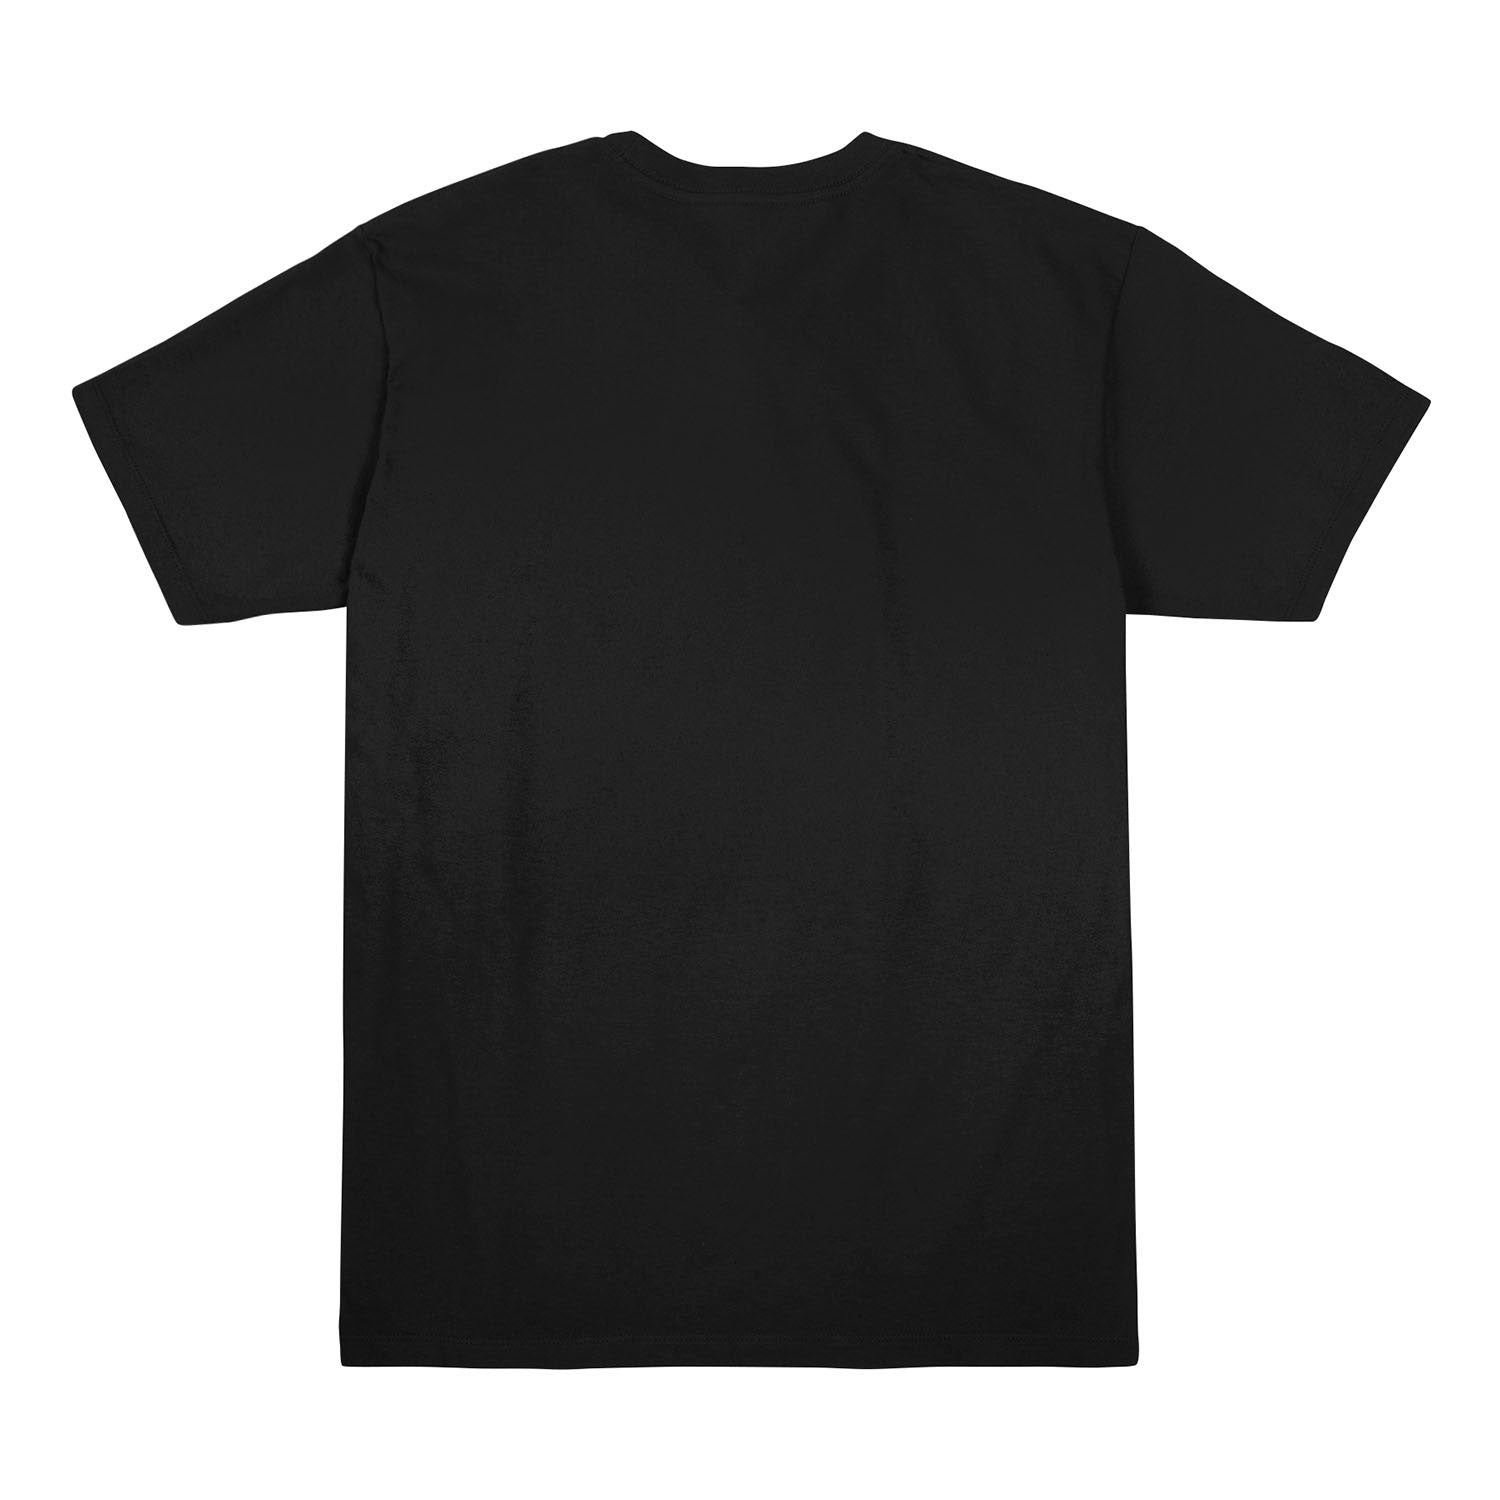 Call of Duty Tranzit Welcome Aboard Black T-Shirt - Back view